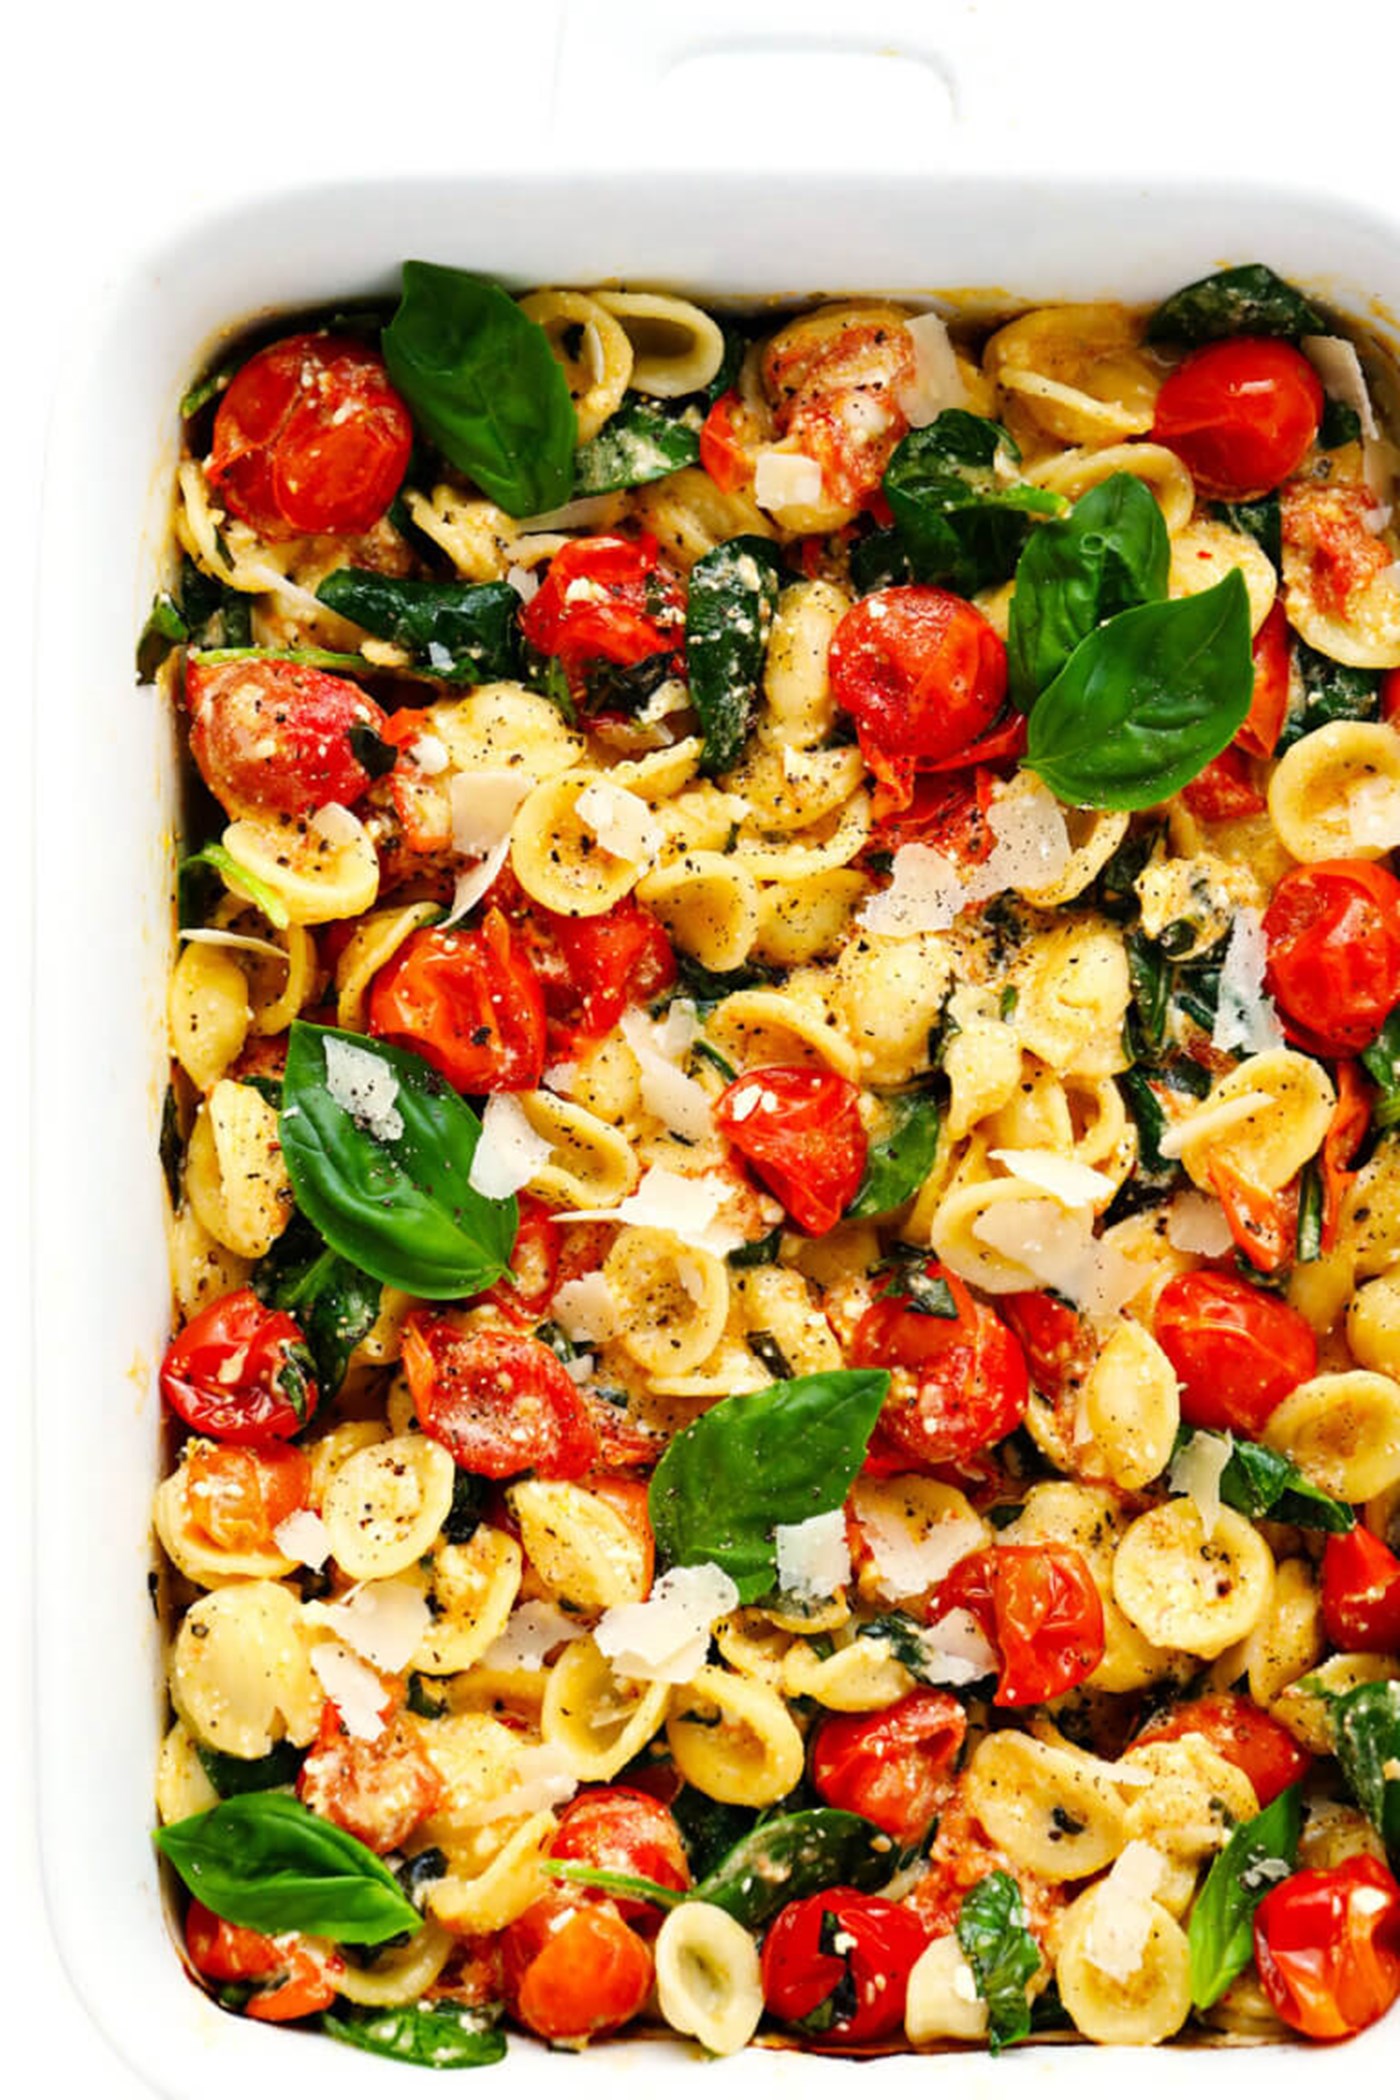 Baked feta Pasta (Credit: Gimme Some Oven)